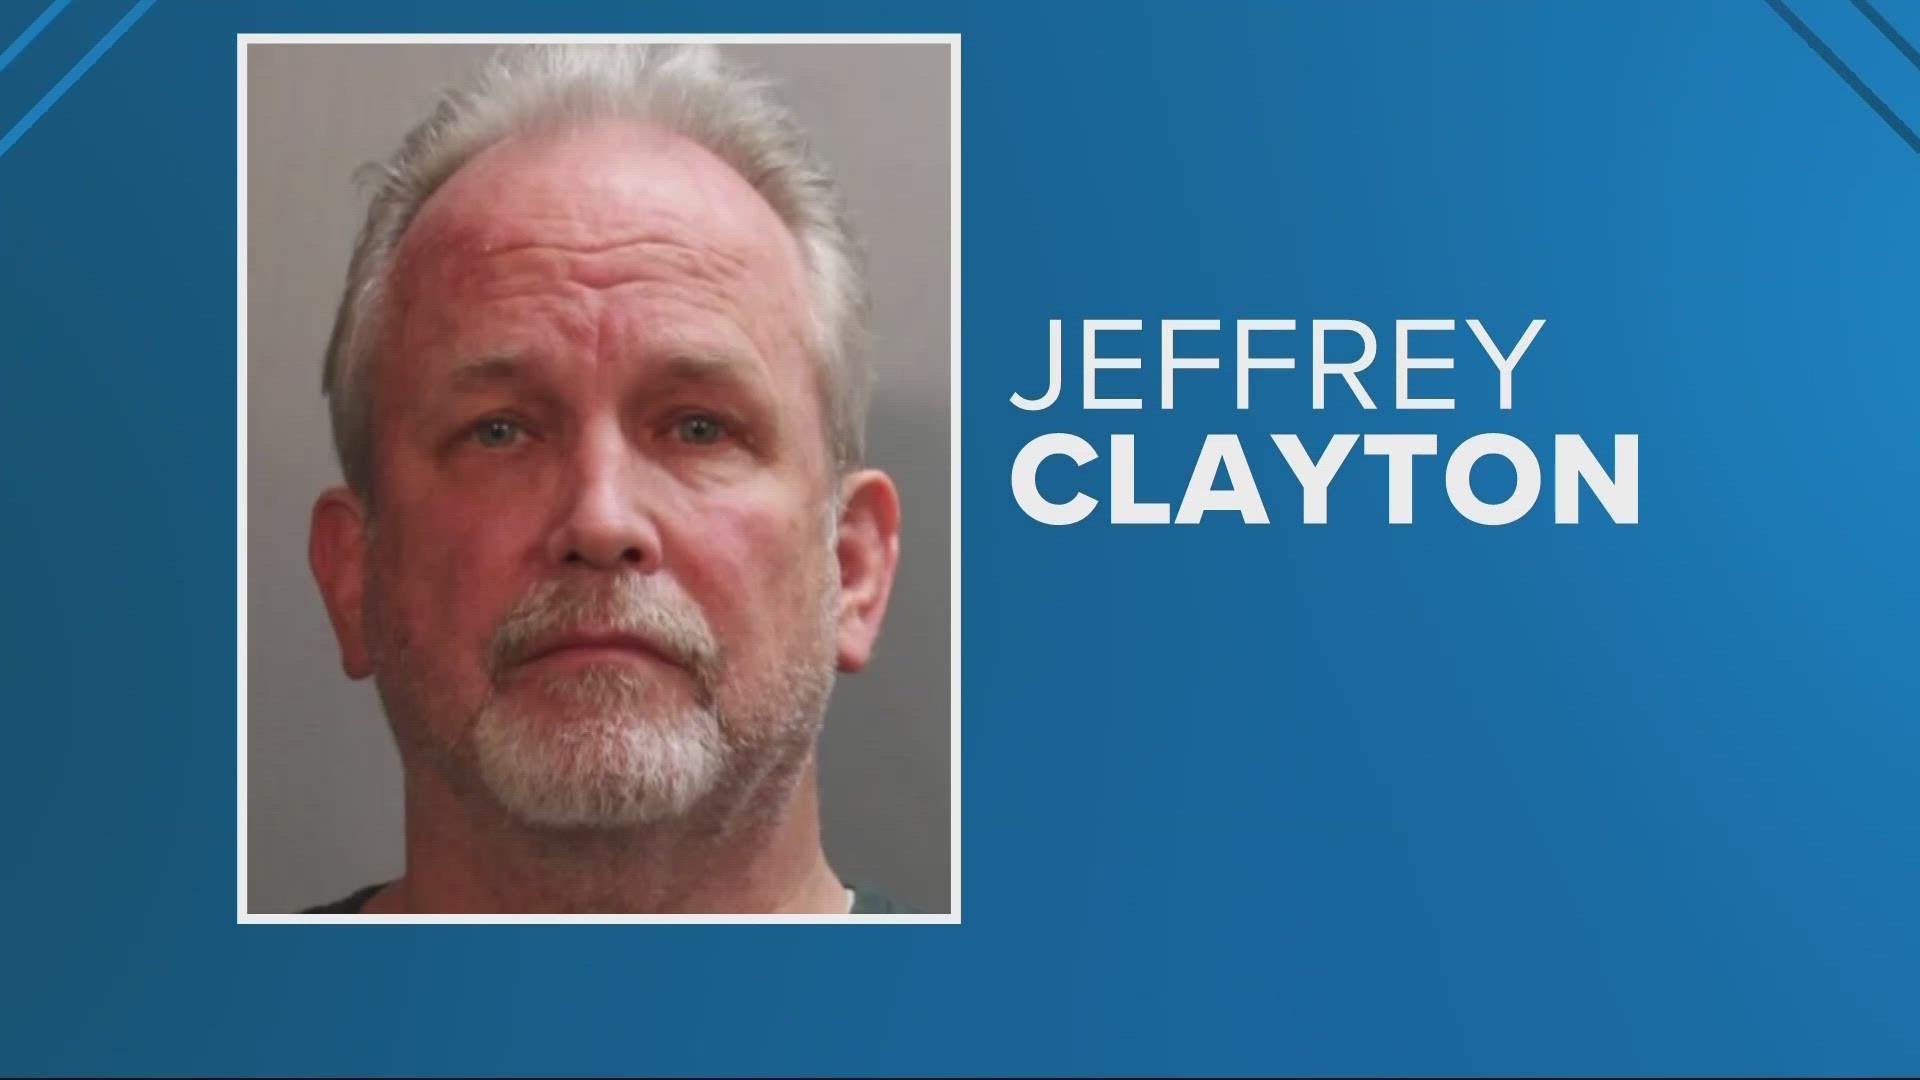 Jefferey Clayton told the judge that he's struggling financially.